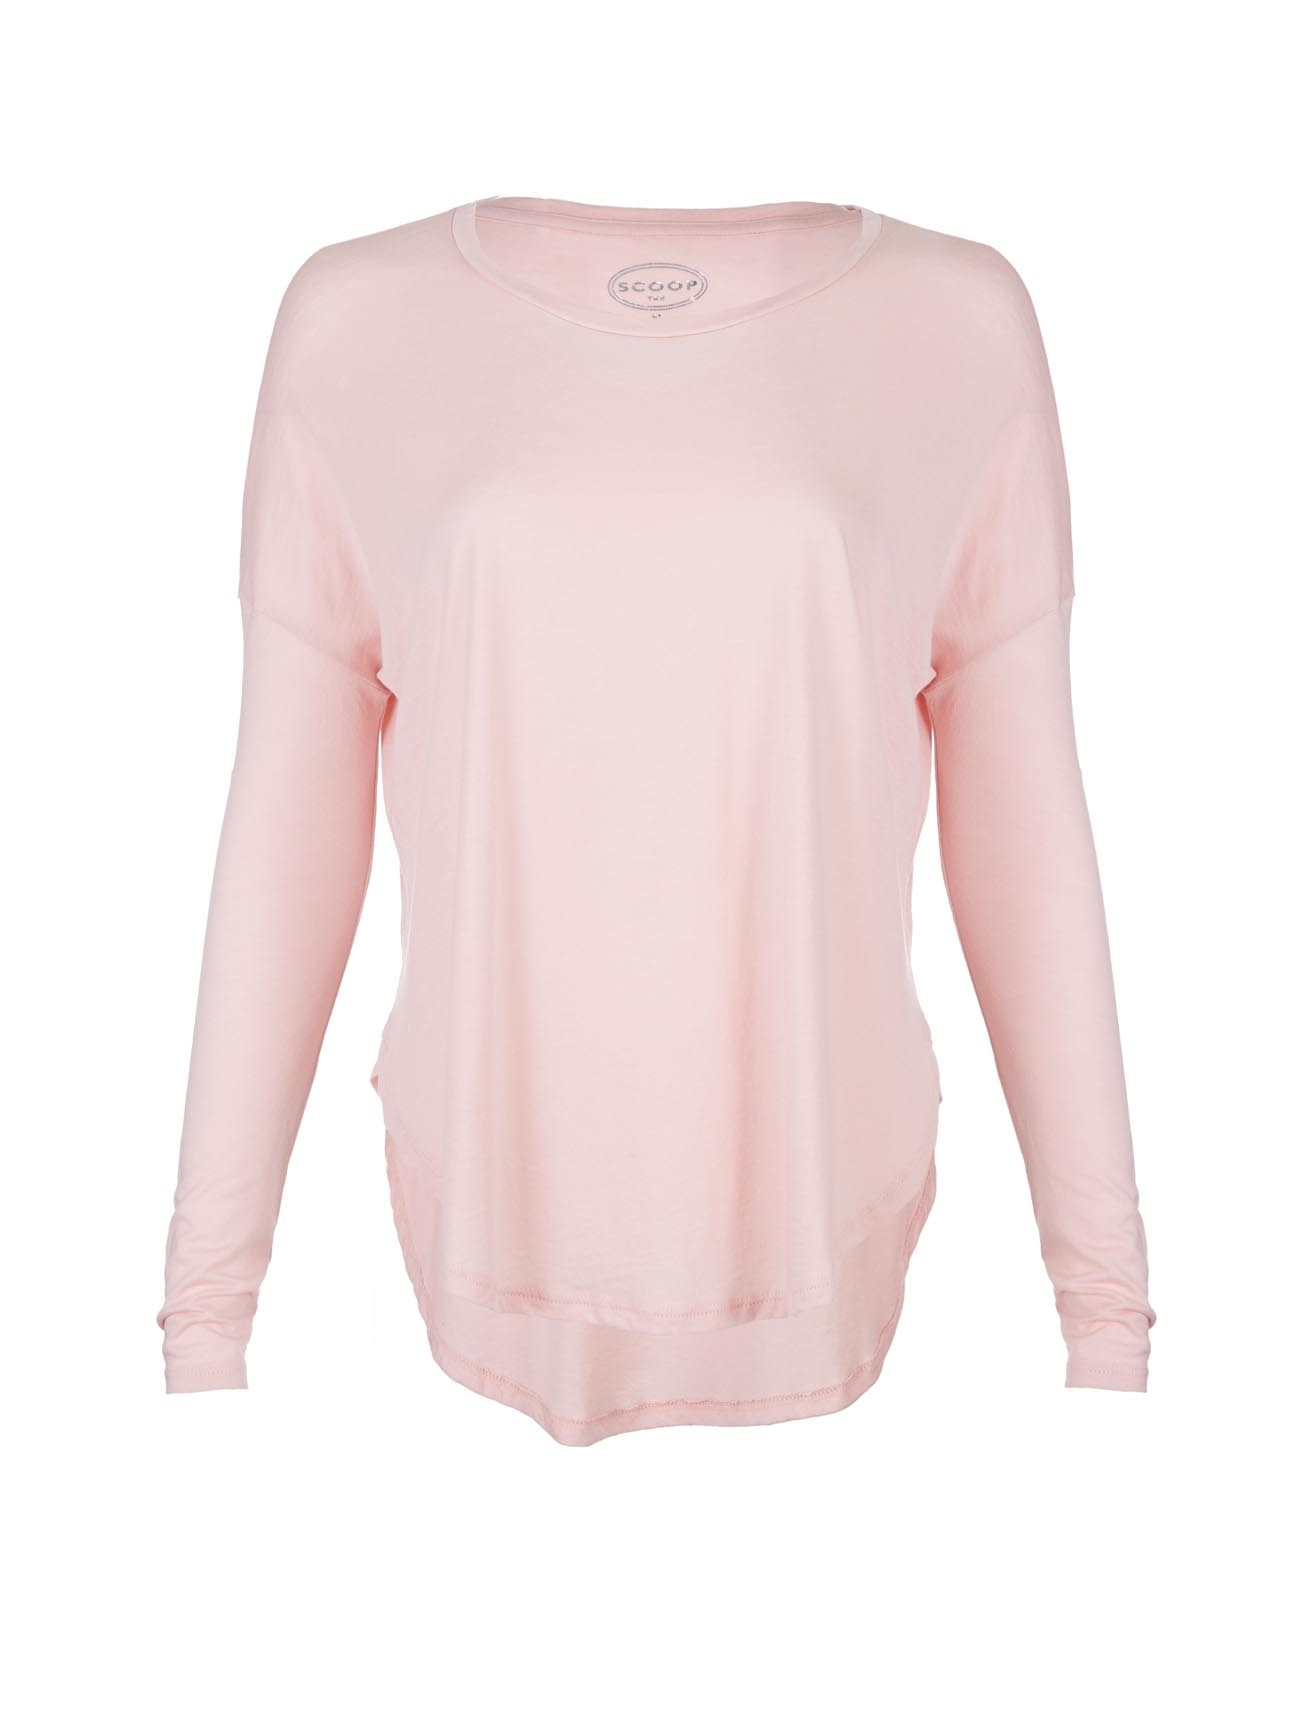 Scoop Long Sleeve Modal Cotton Tee in Pink (LIGHT PINK) | Lyst